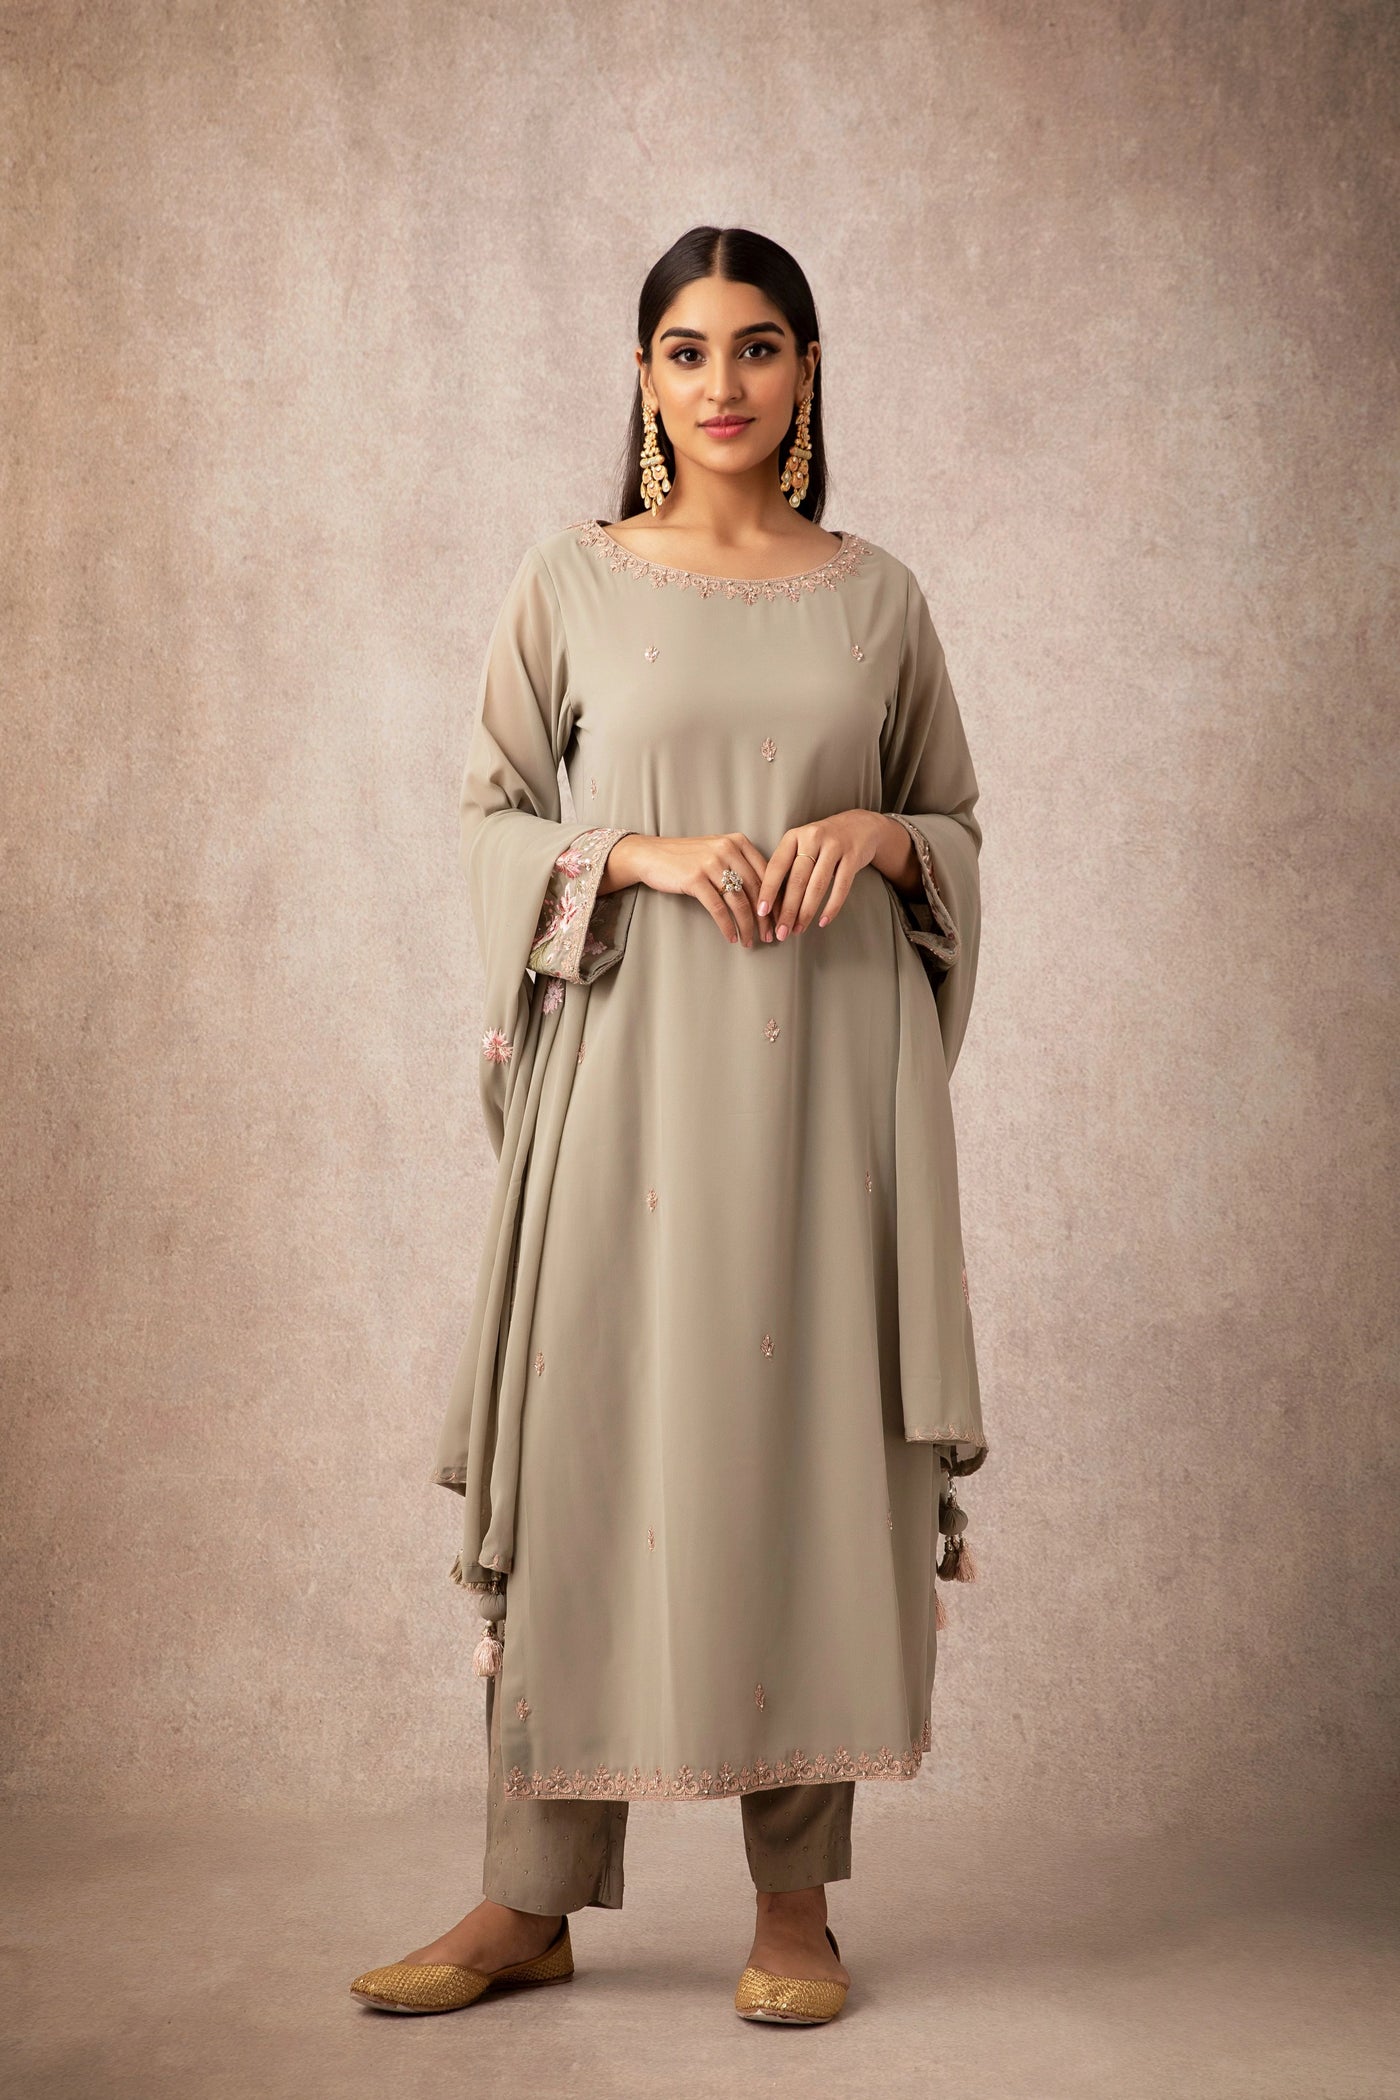 Olive Straight Kurta Set - Indian Clothing in Denver, CO, Aurora, CO, Boulder, CO, Fort Collins, CO, Colorado Springs, CO, Parker, CO, Highlands Ranch, CO, Cherry Creek, CO, Centennial, CO, and Longmont, CO. Nationwide shipping USA - India Fashion X